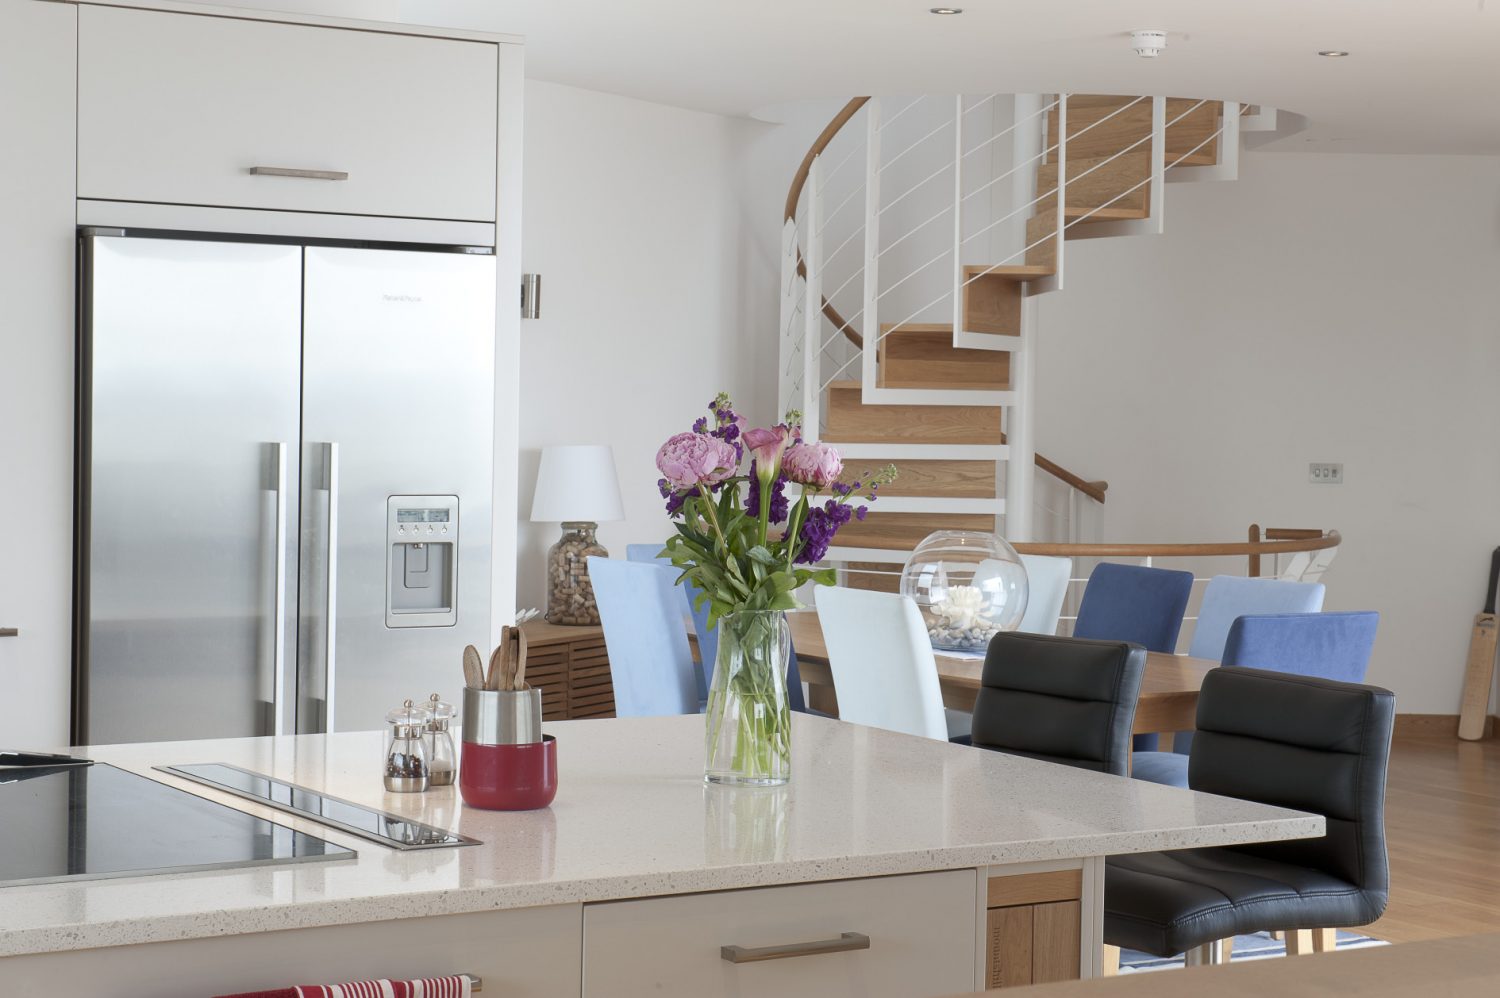 The kitchen, designed by Mounts Hill Woodcraft & Design, is sleekly efficient in appearance, with simple white cupboards and stainless steel appliances